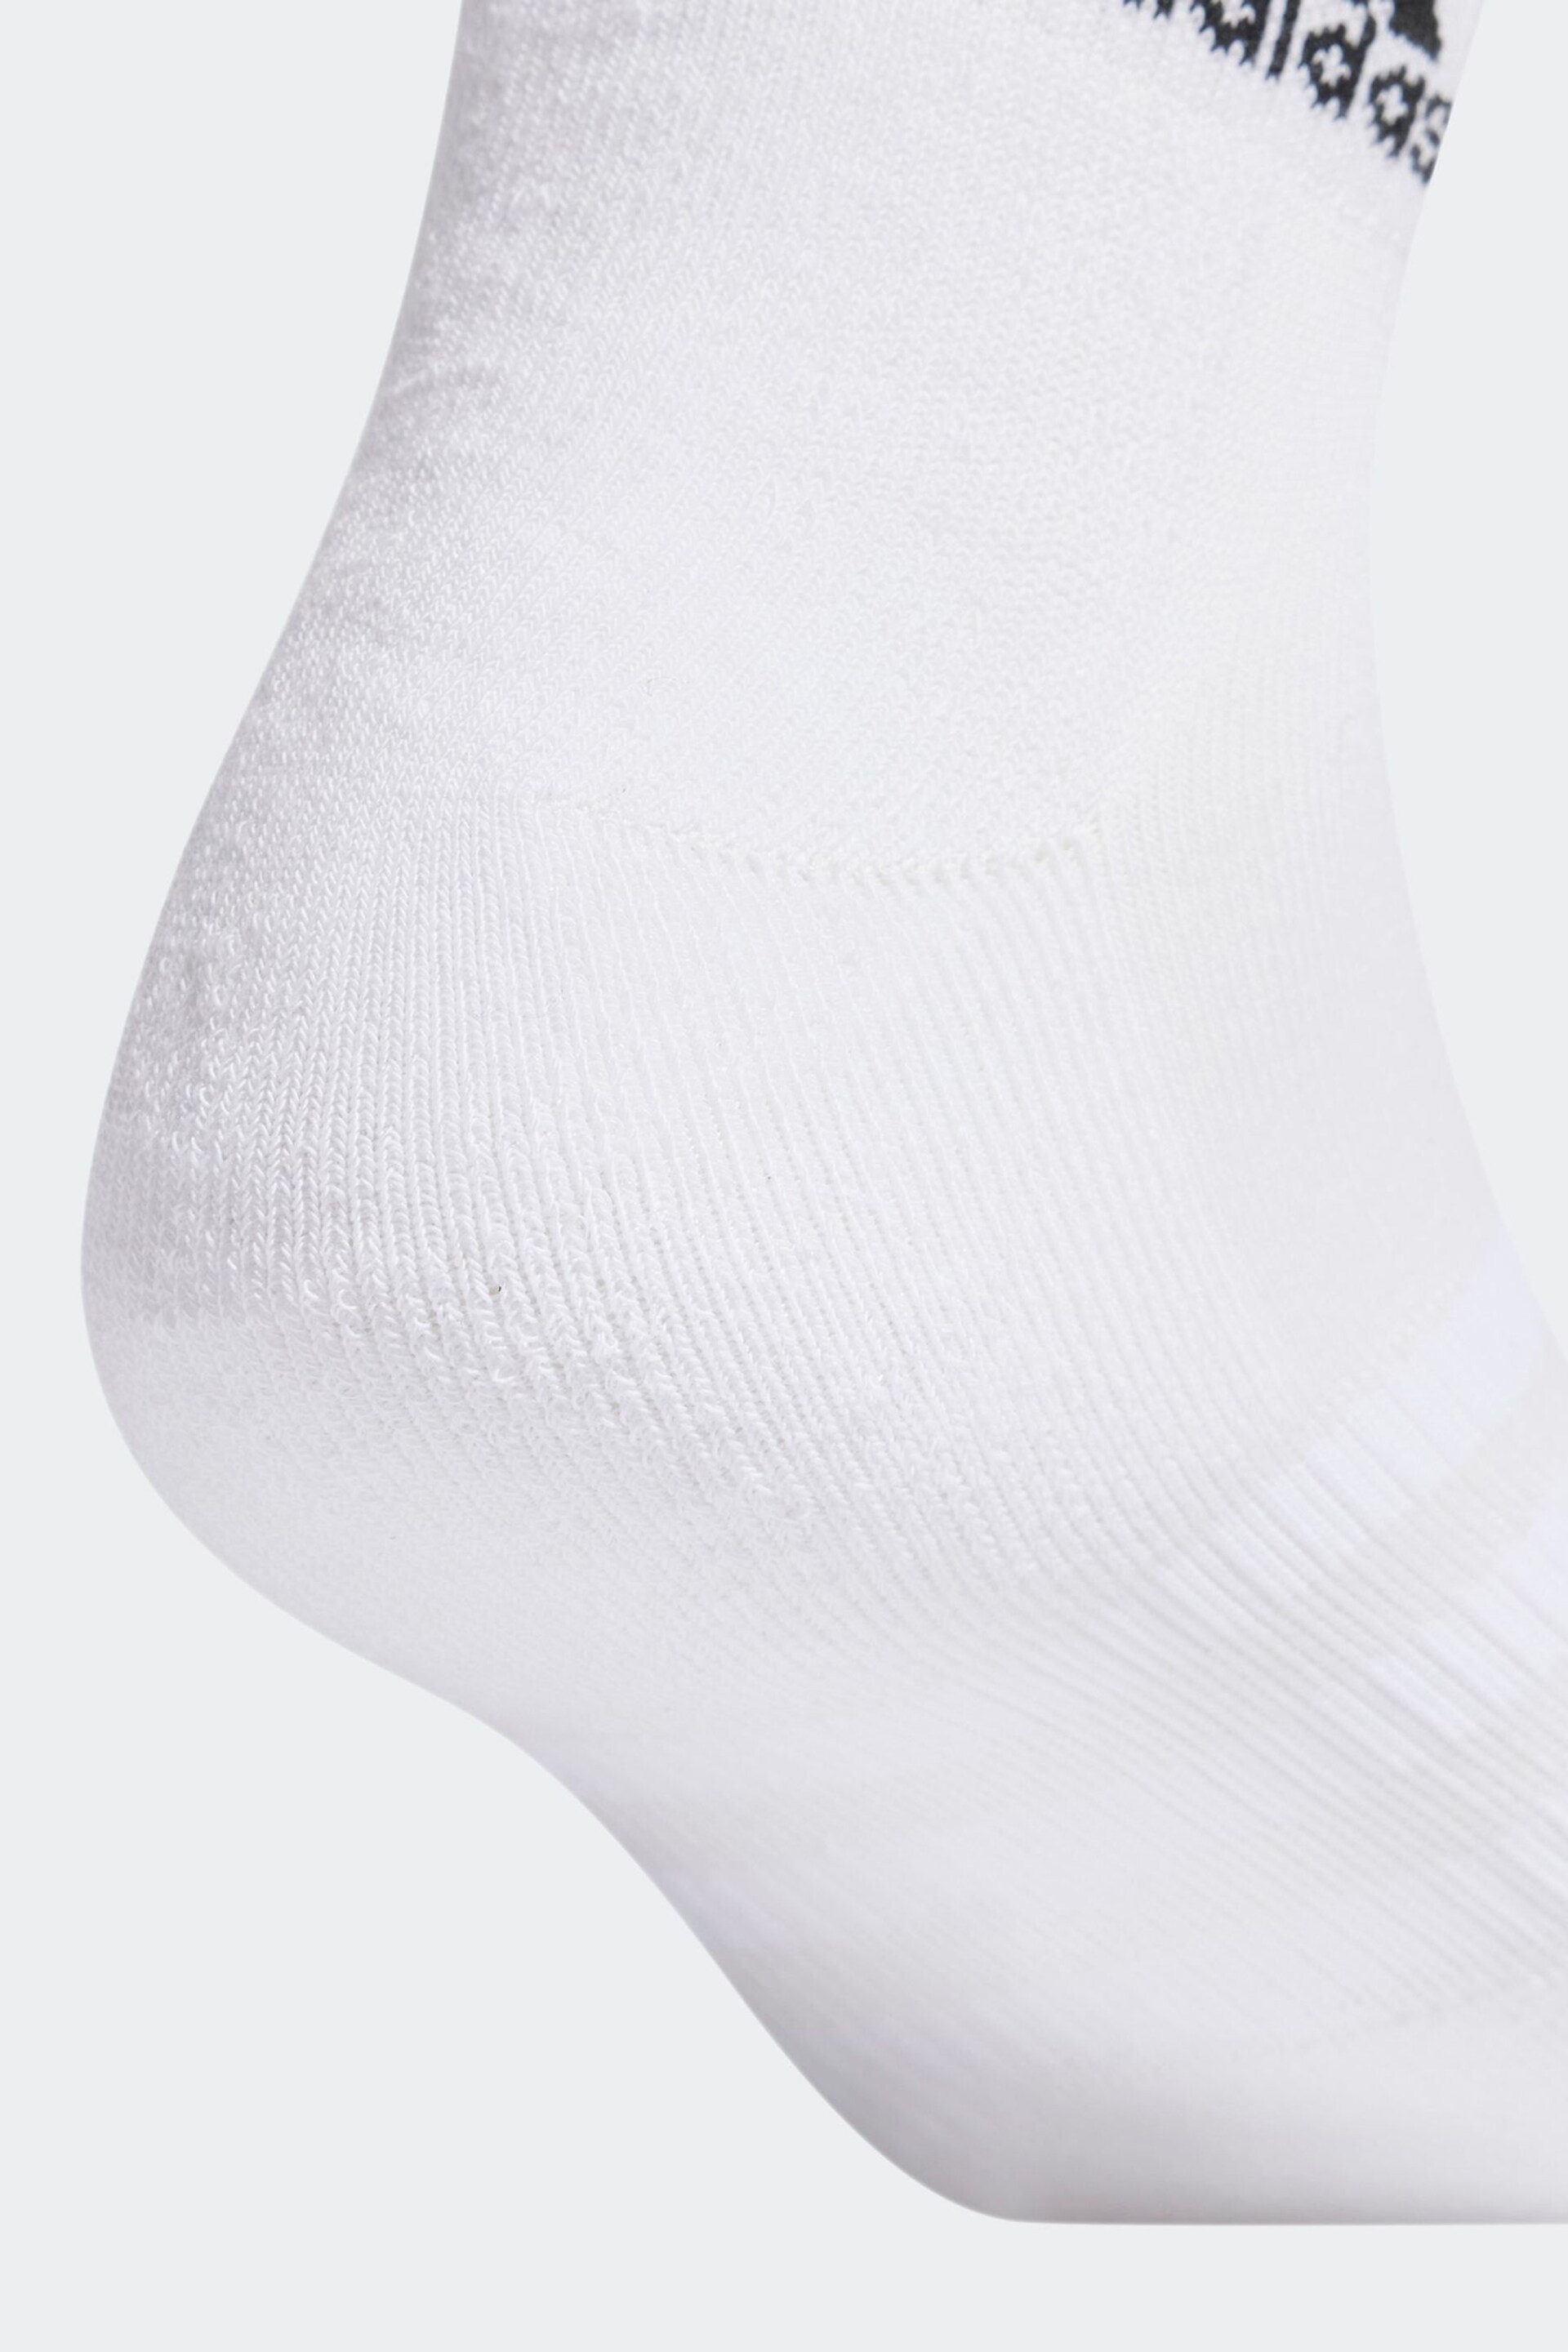 adidas White Cushioned Sportswear Ankle Socks 3 Pack - Image 3 of 4